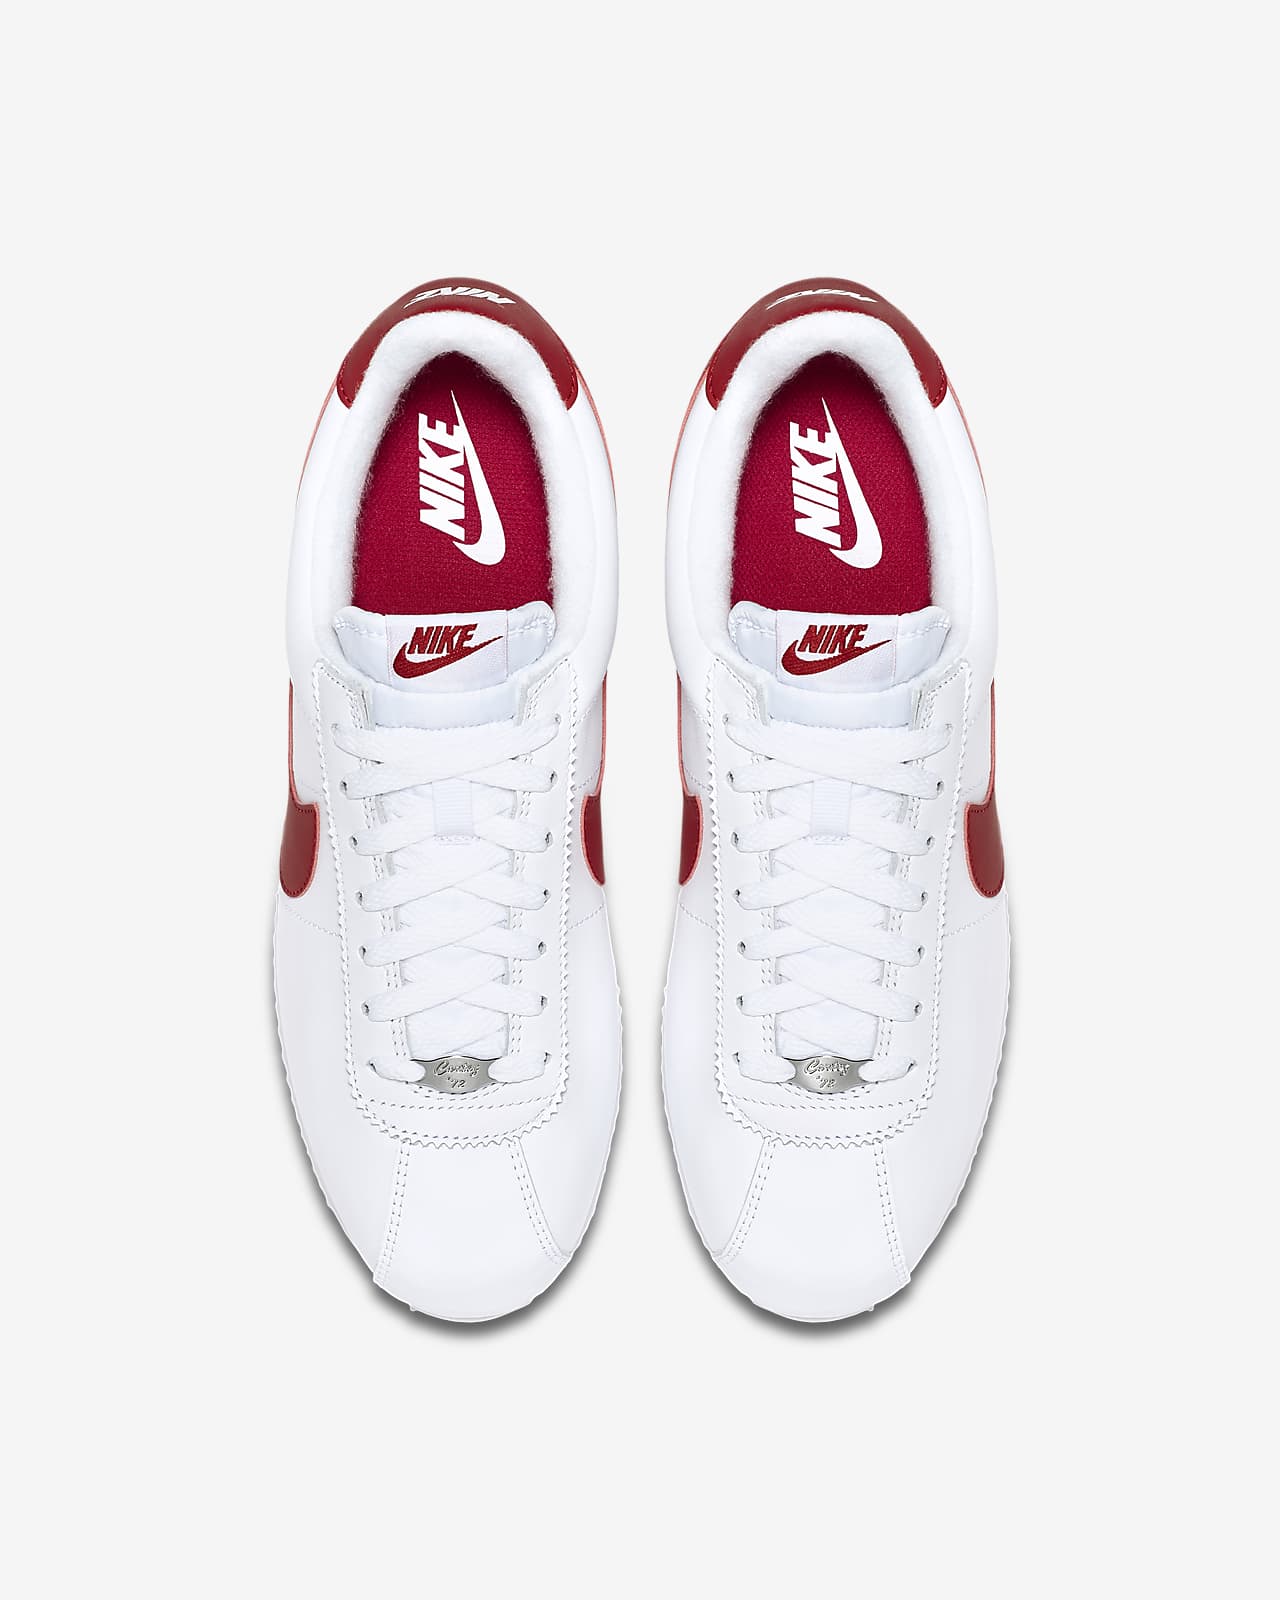 cortez shoes red and white